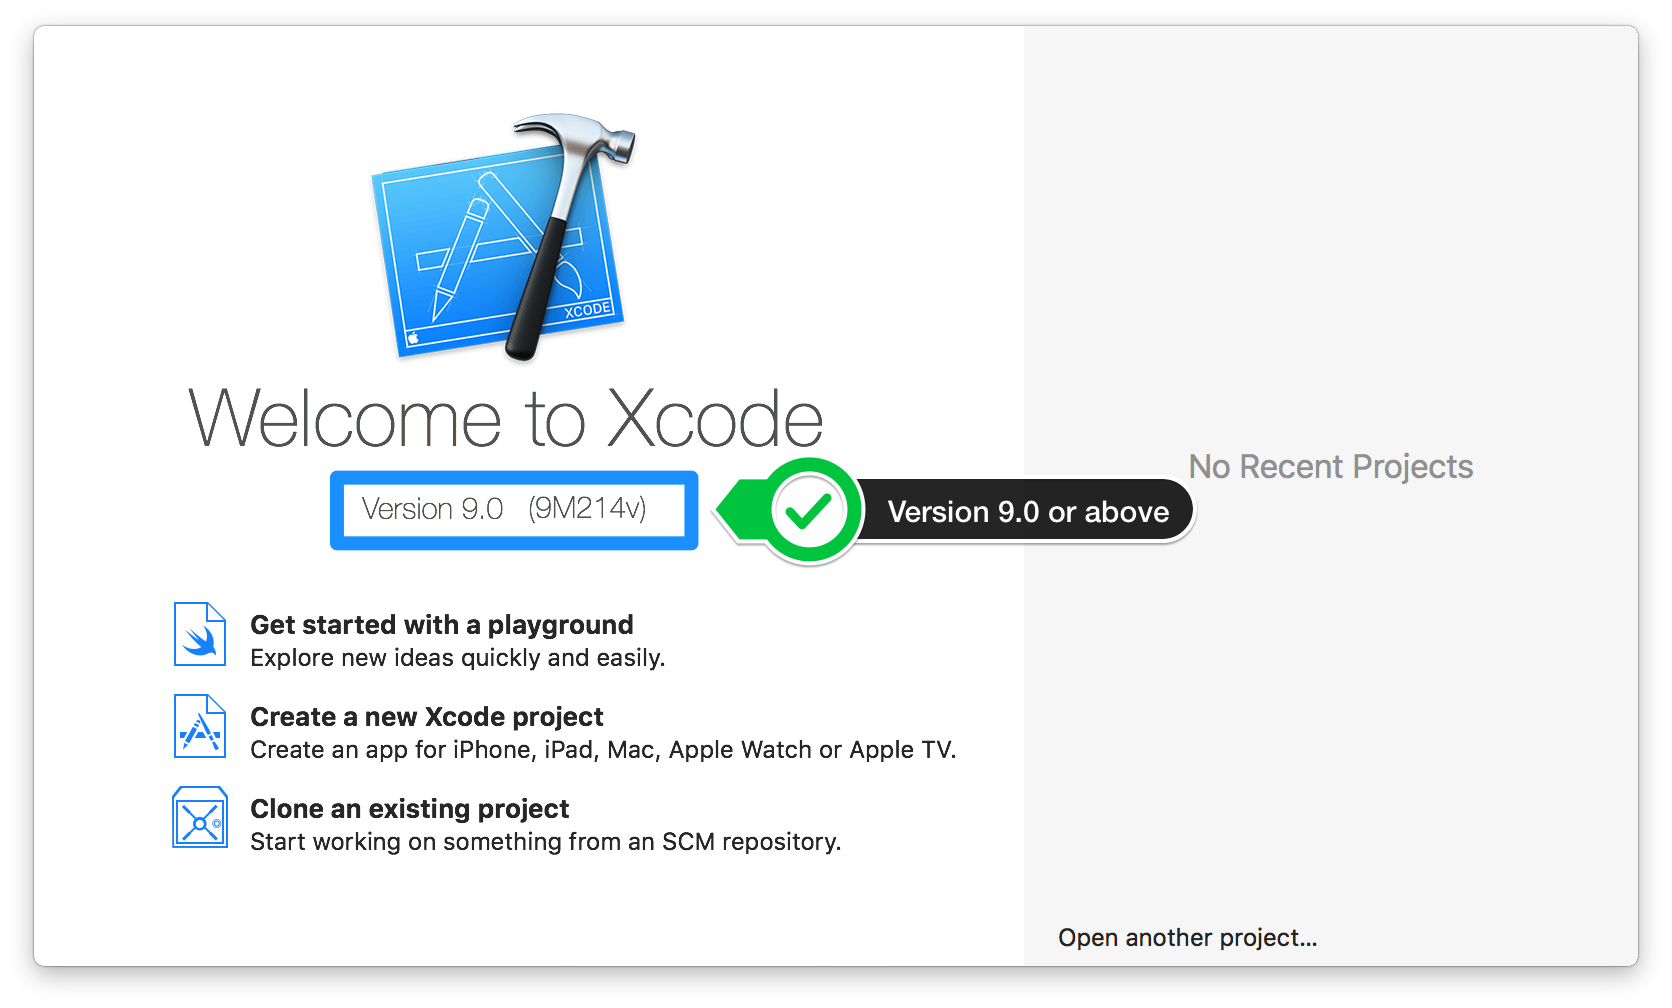 xcode for mac 10.12